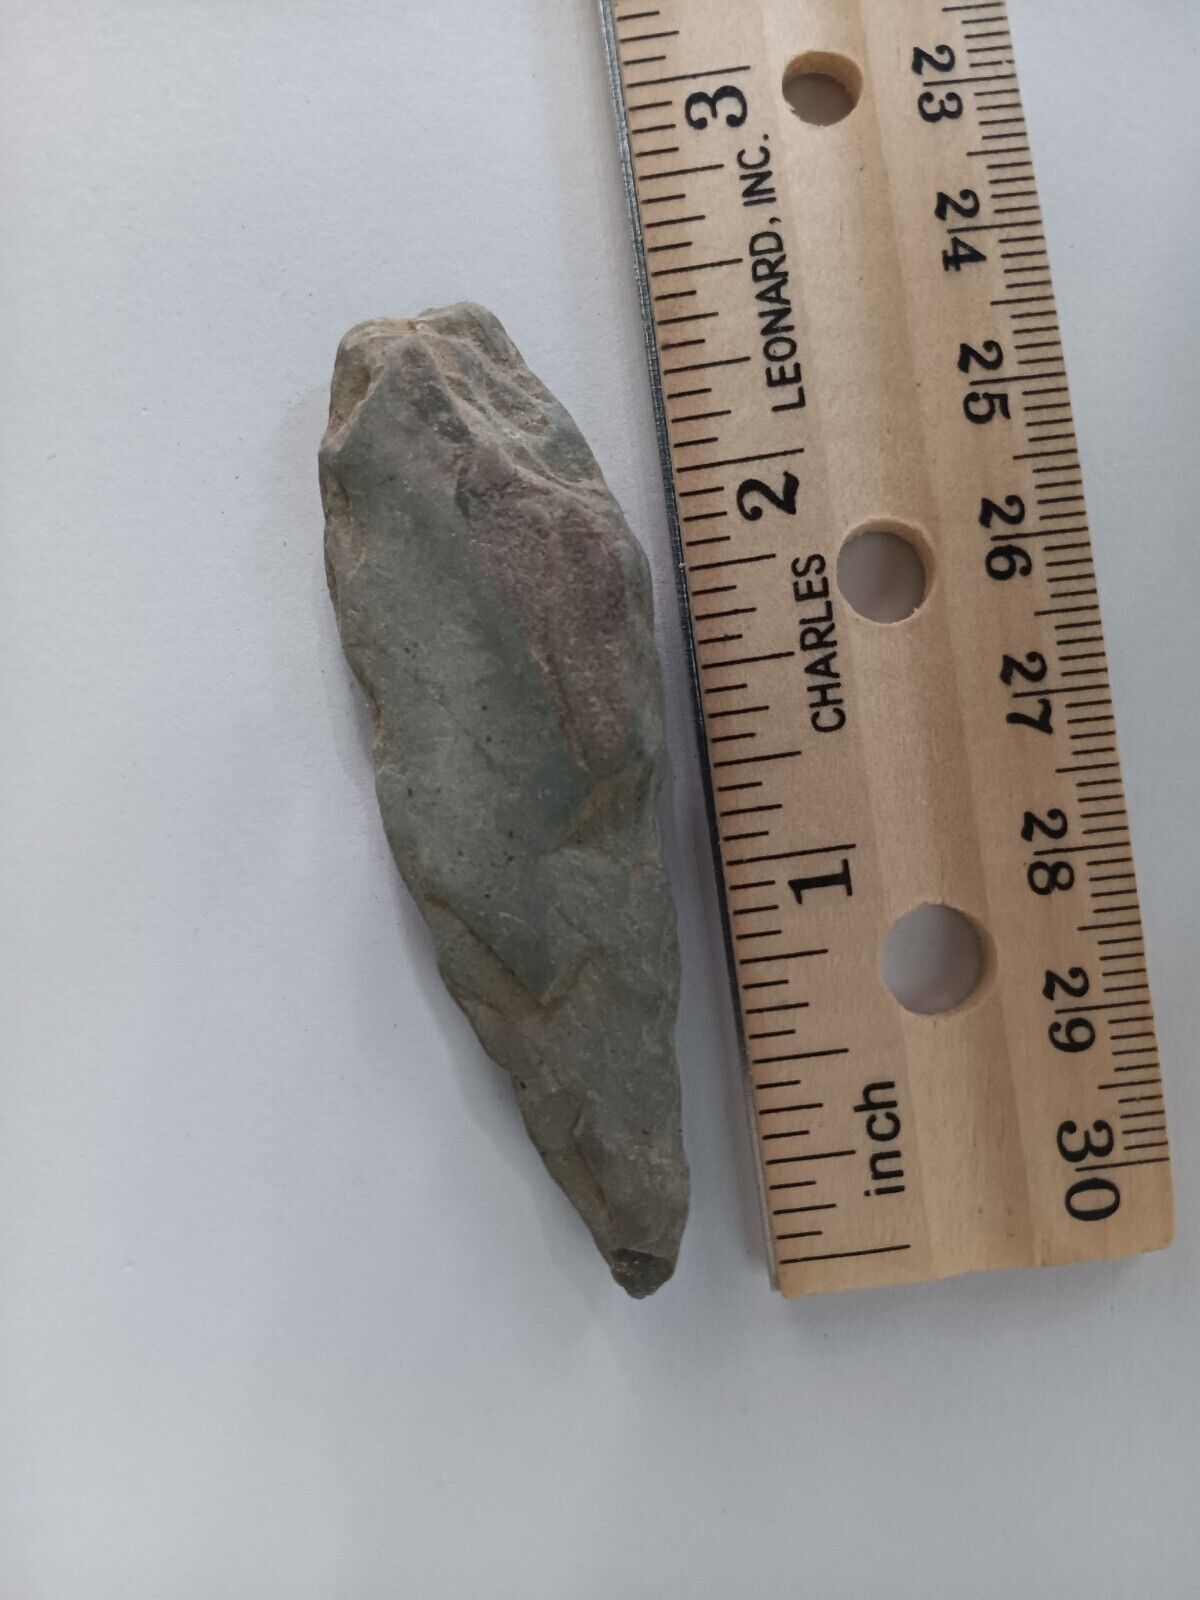 AUTHENTIC NATIVE AMERICAN INDIAN ARTIFACT FOUND, EASTERN N.C.--- CCC/27